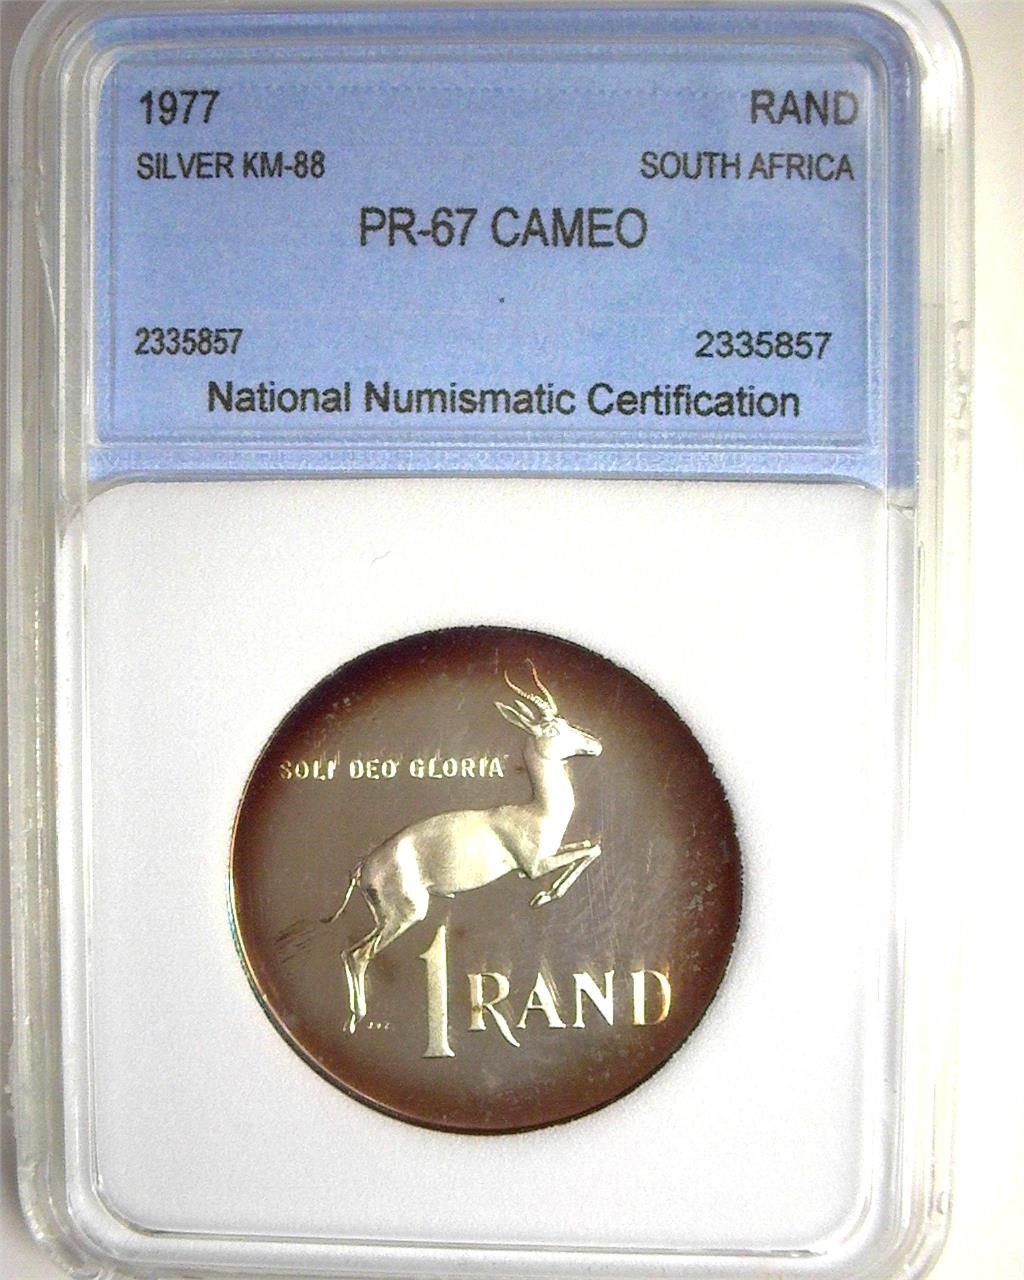 1977 Rand NNC PR67 Cameo S. Africa Silver